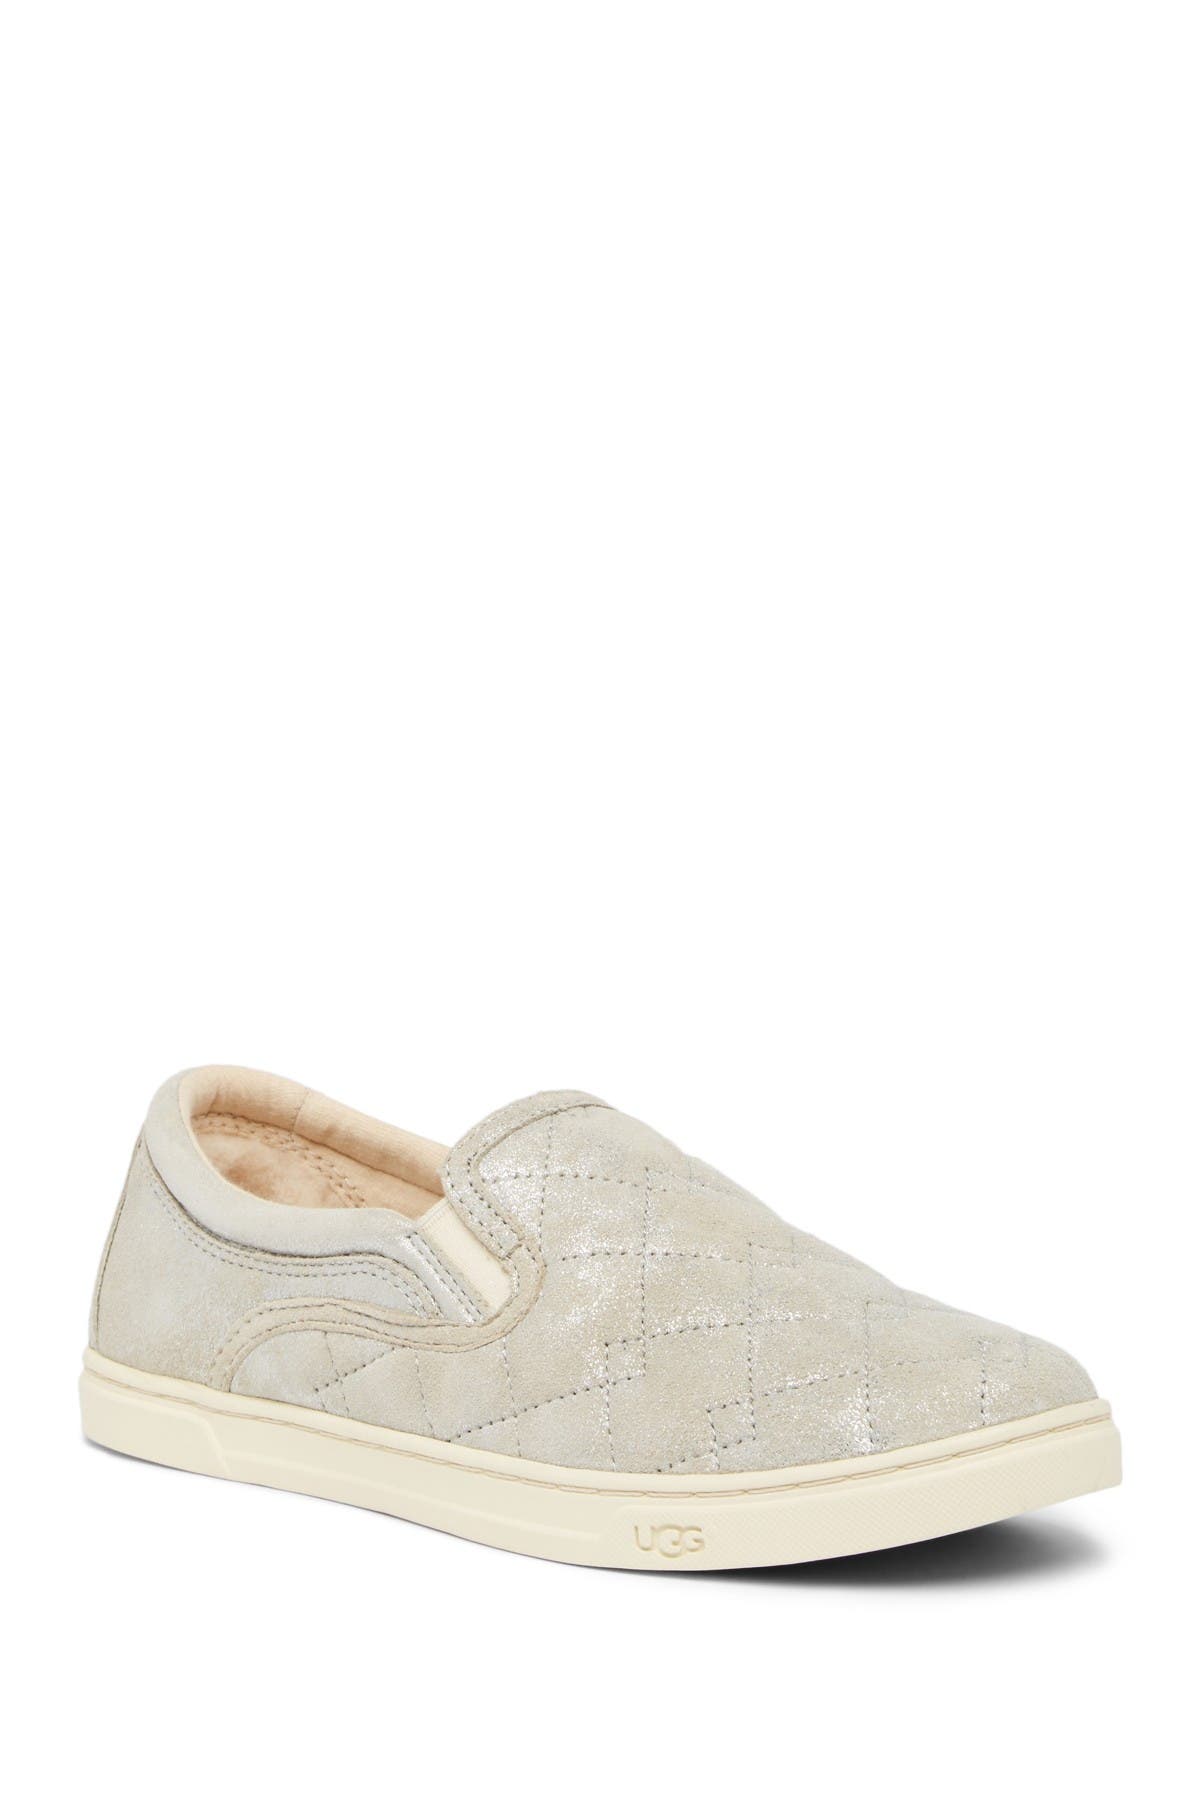 UGG | Fierce Deco Quilted Slip-On 